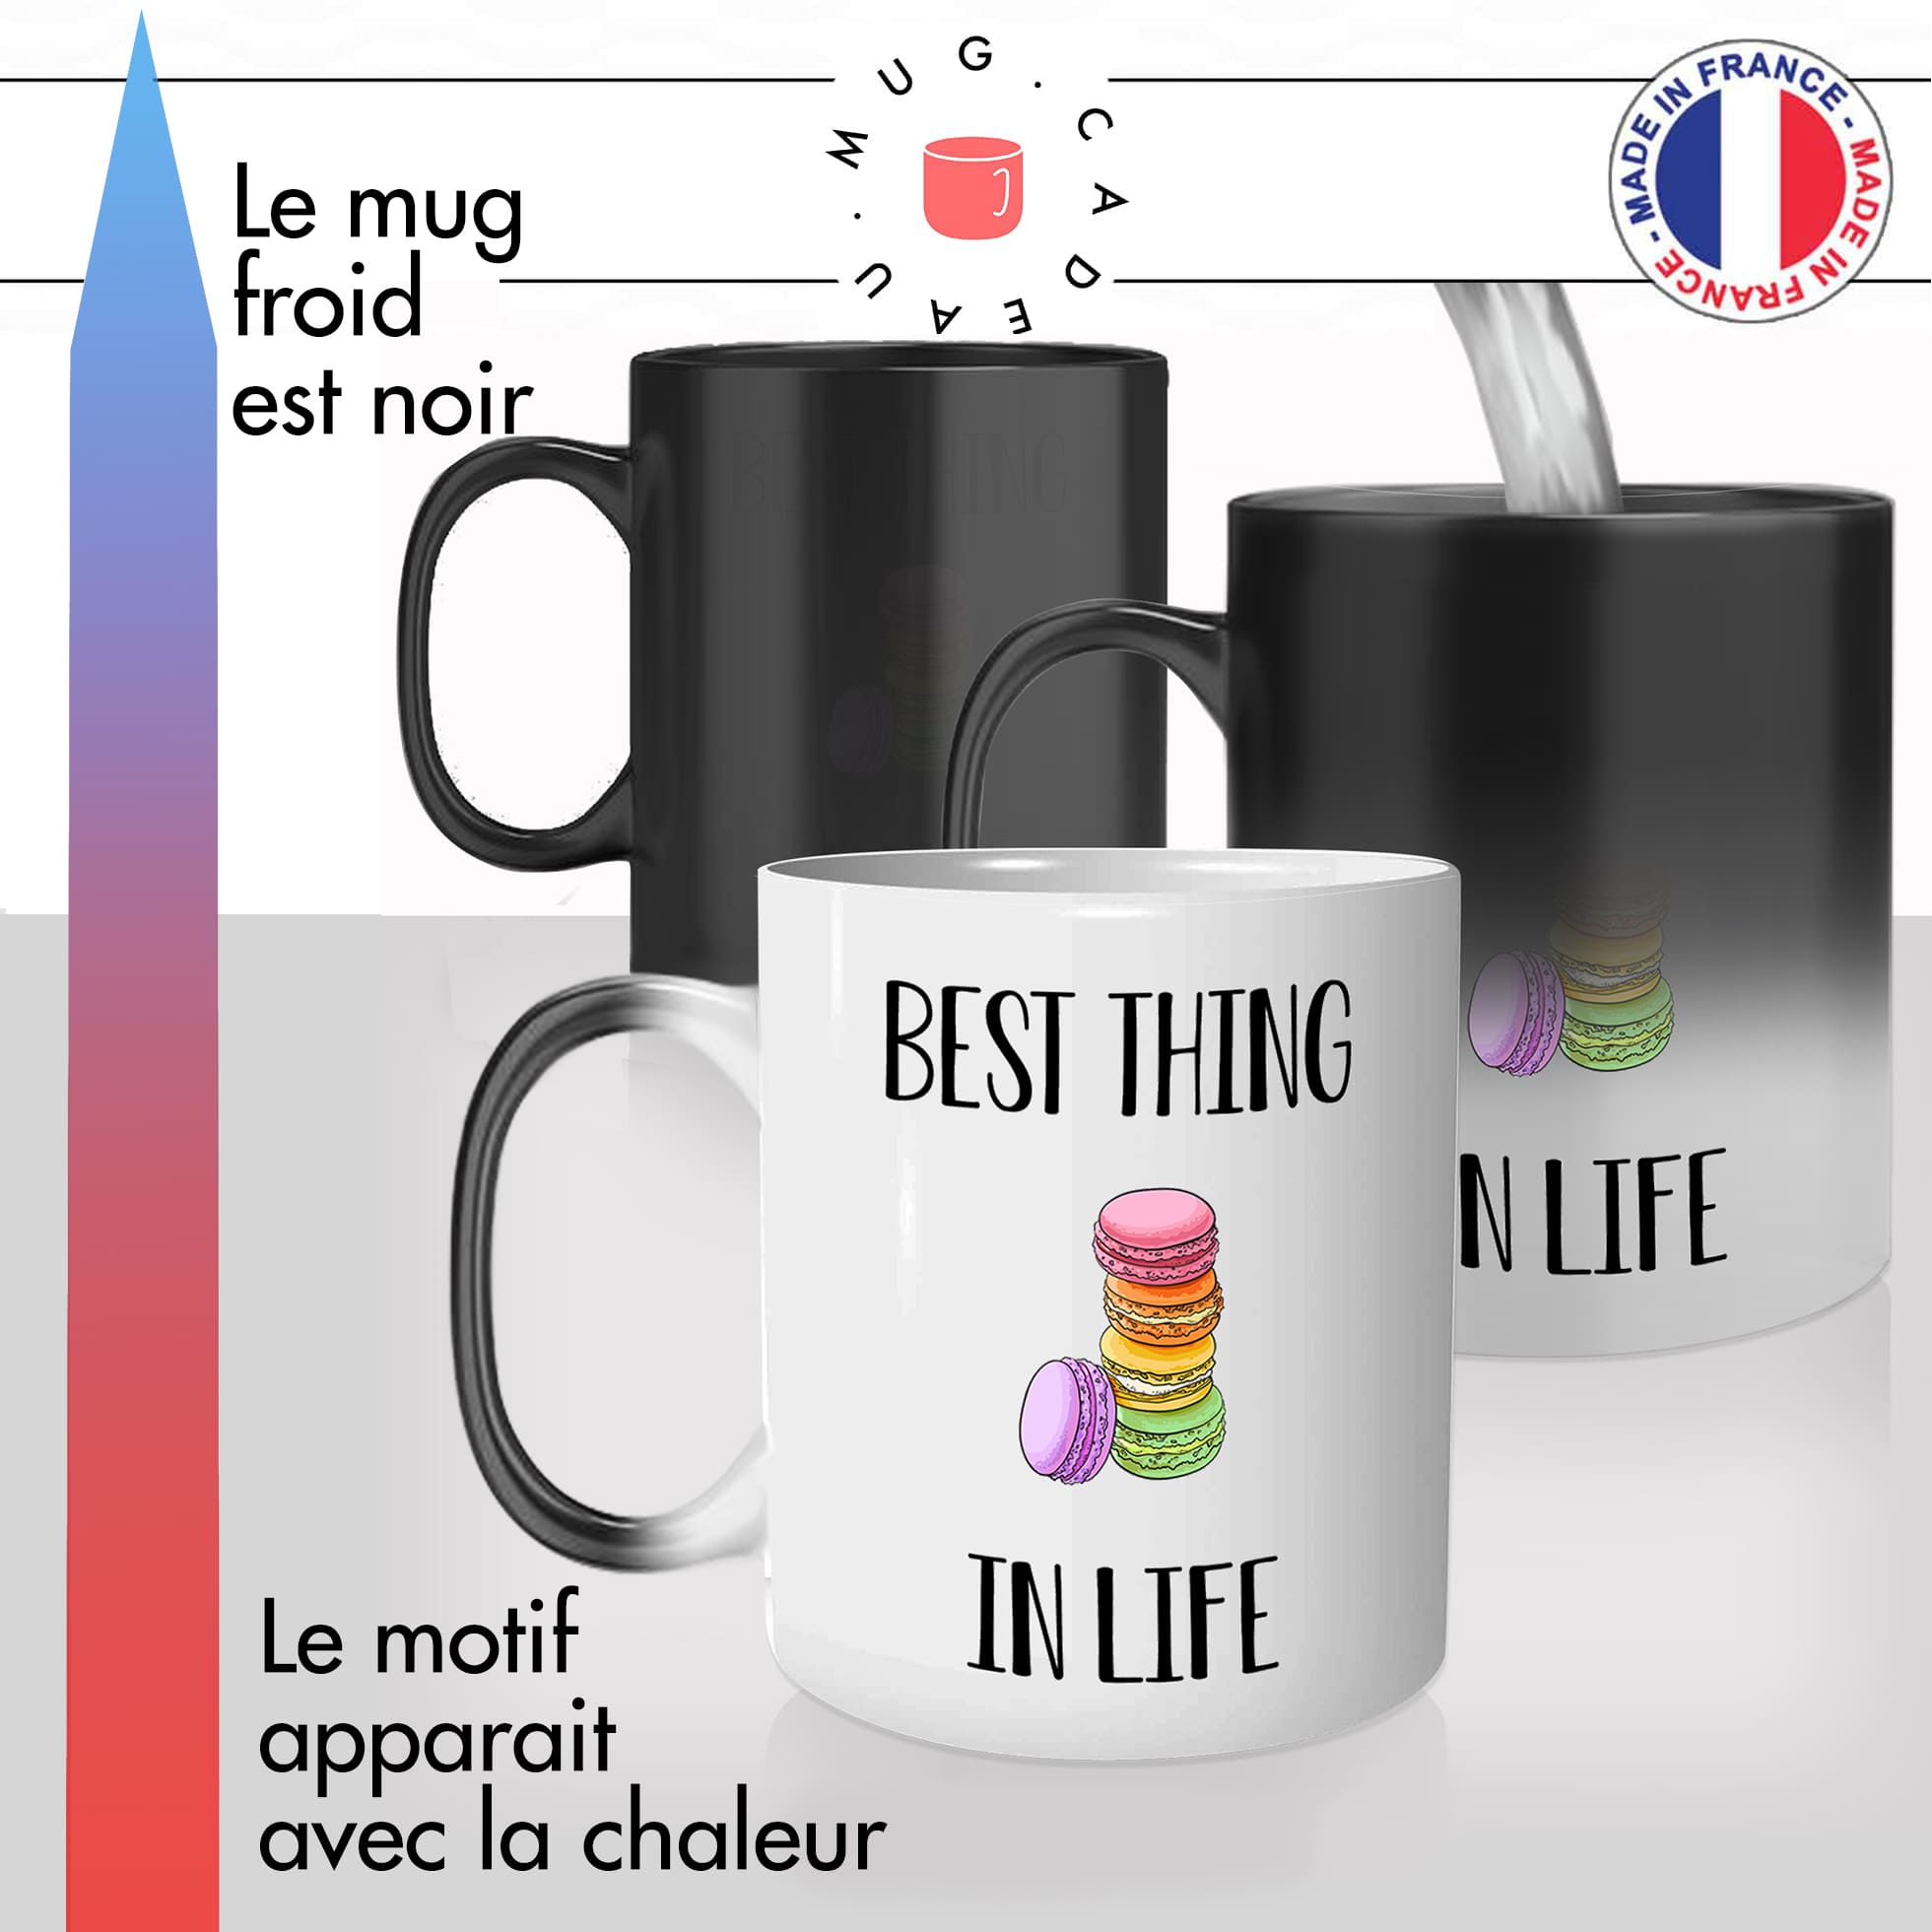 https://media.cdnws.com/_i/189179/17137/791/38/mug-magique-thermoreactif-thermo-chauffant-personnalise-macarons-patisserie-francaise-best-thing-in-life-idee-cadeau-fun-original.jpeg